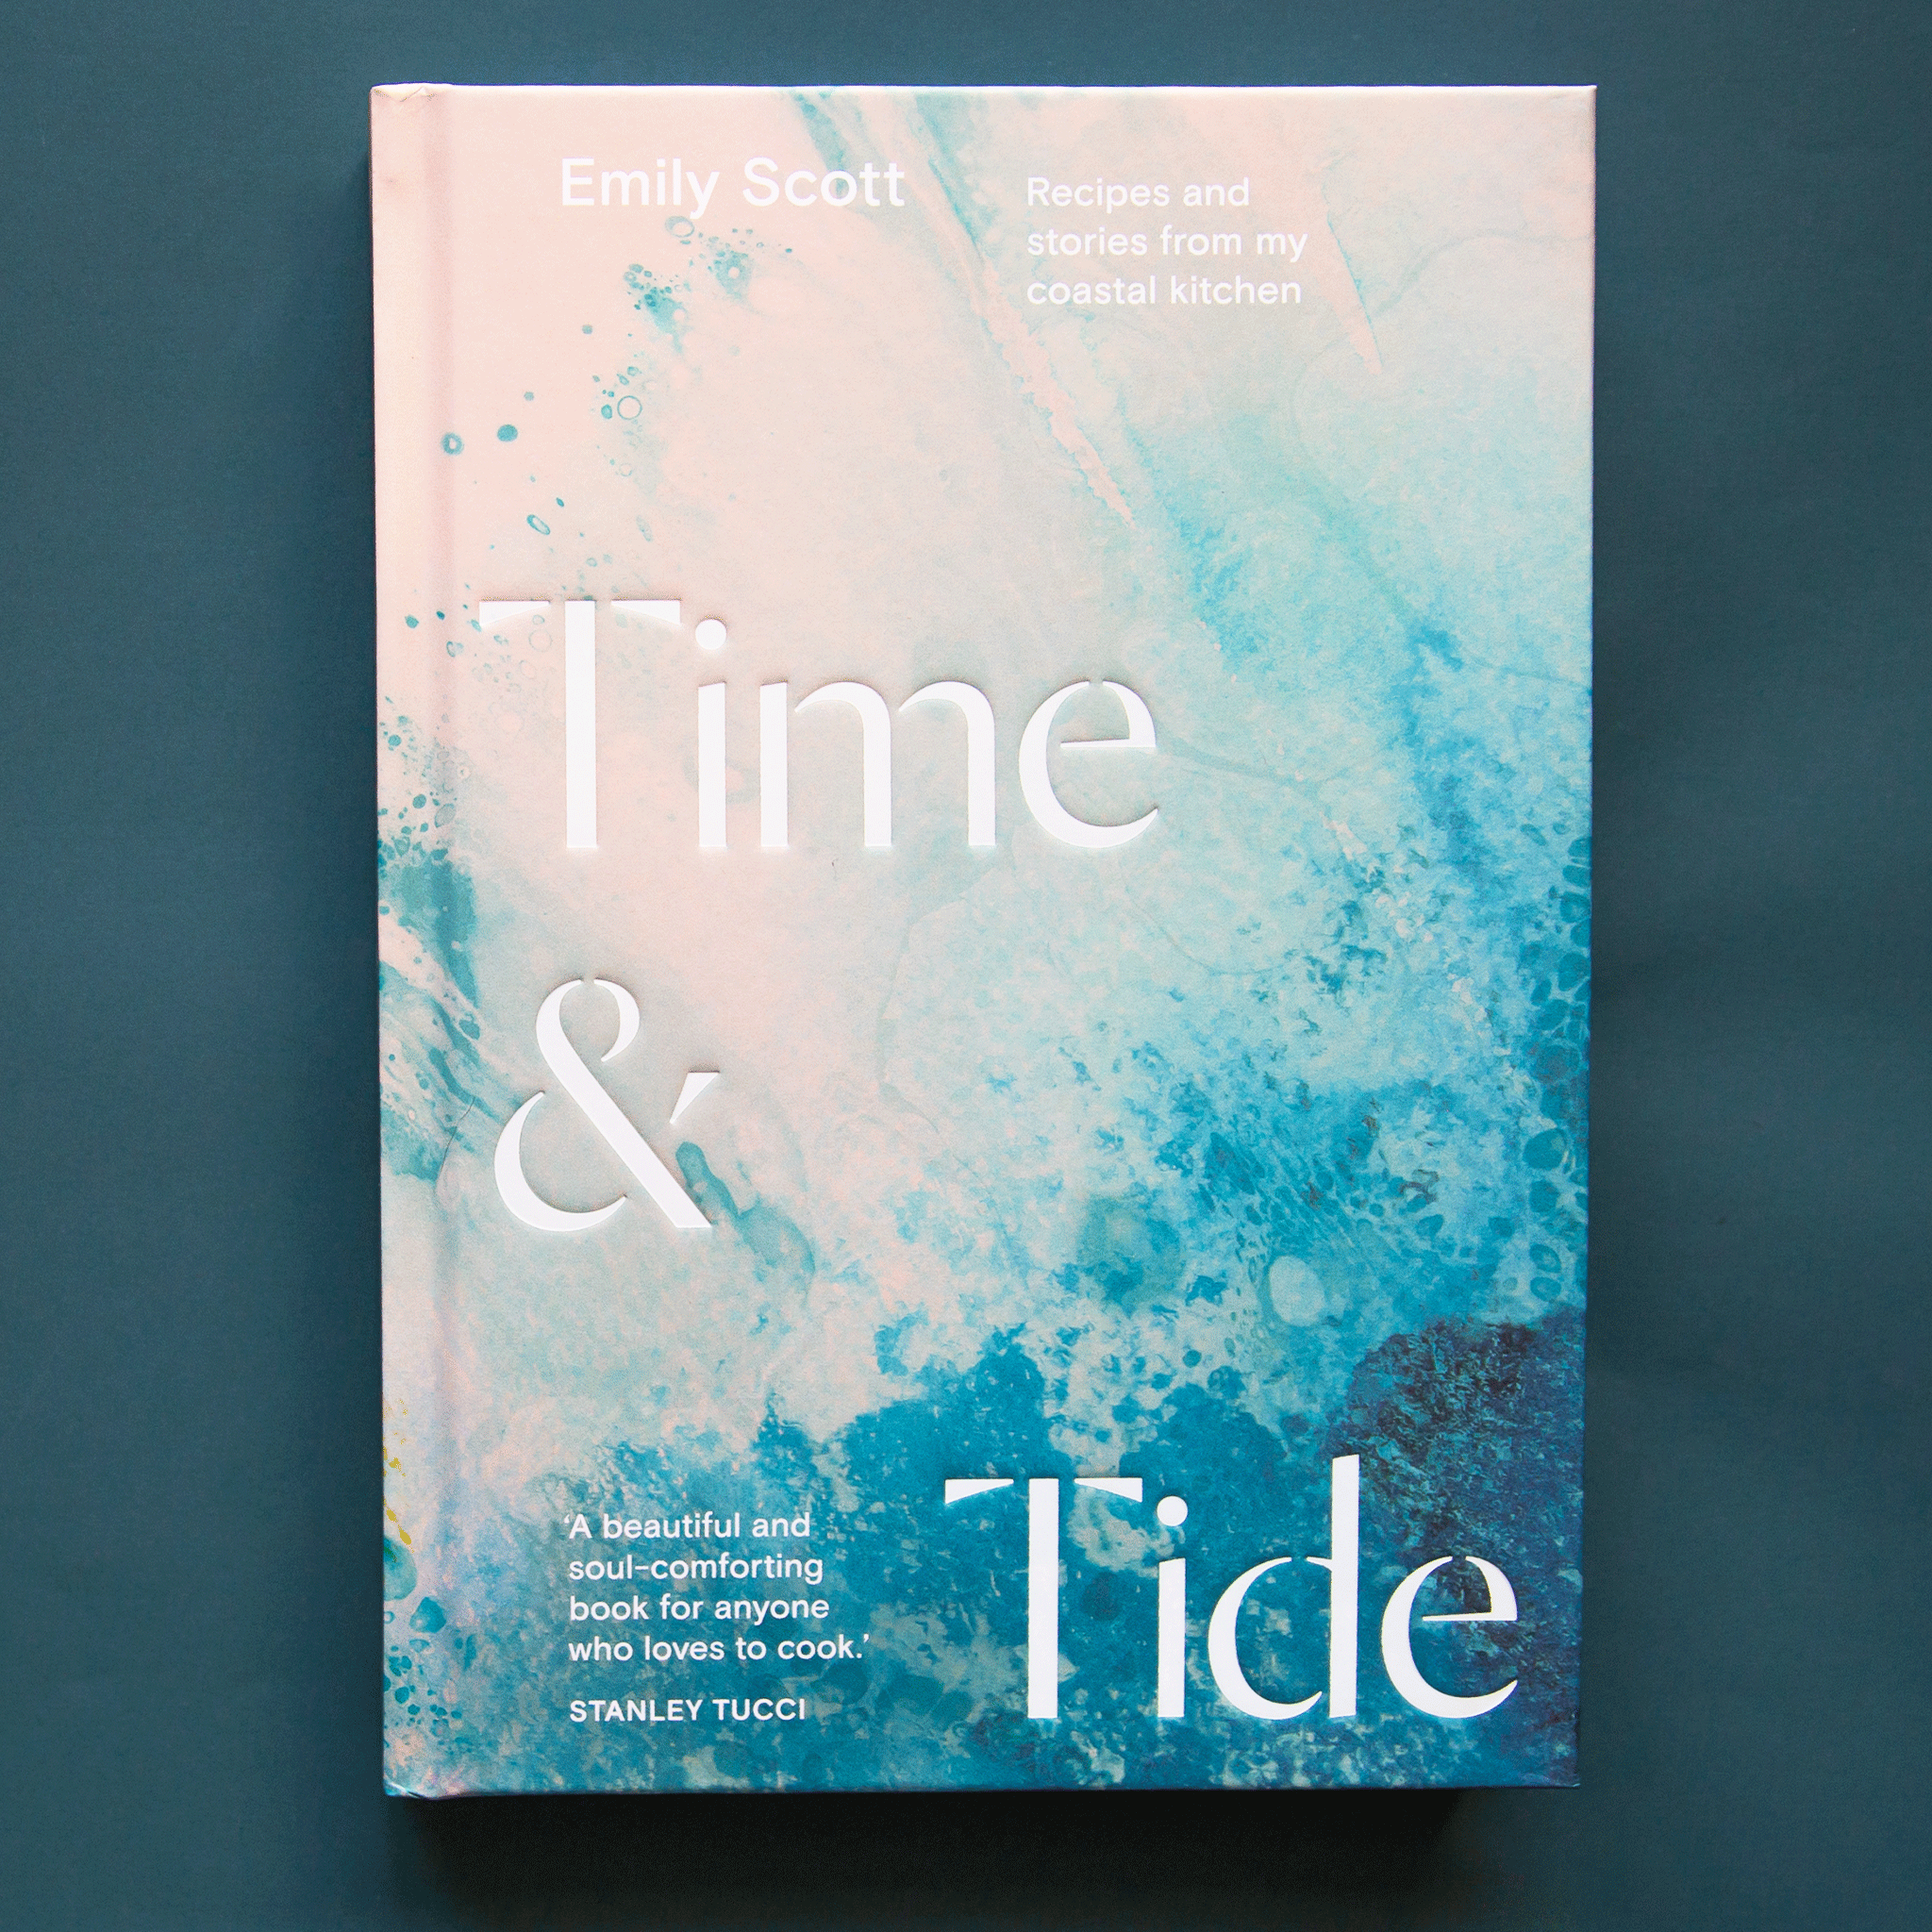 On a dark blue background is a blue and white ocean front cover of a book with the title reading "Time & Tide". 